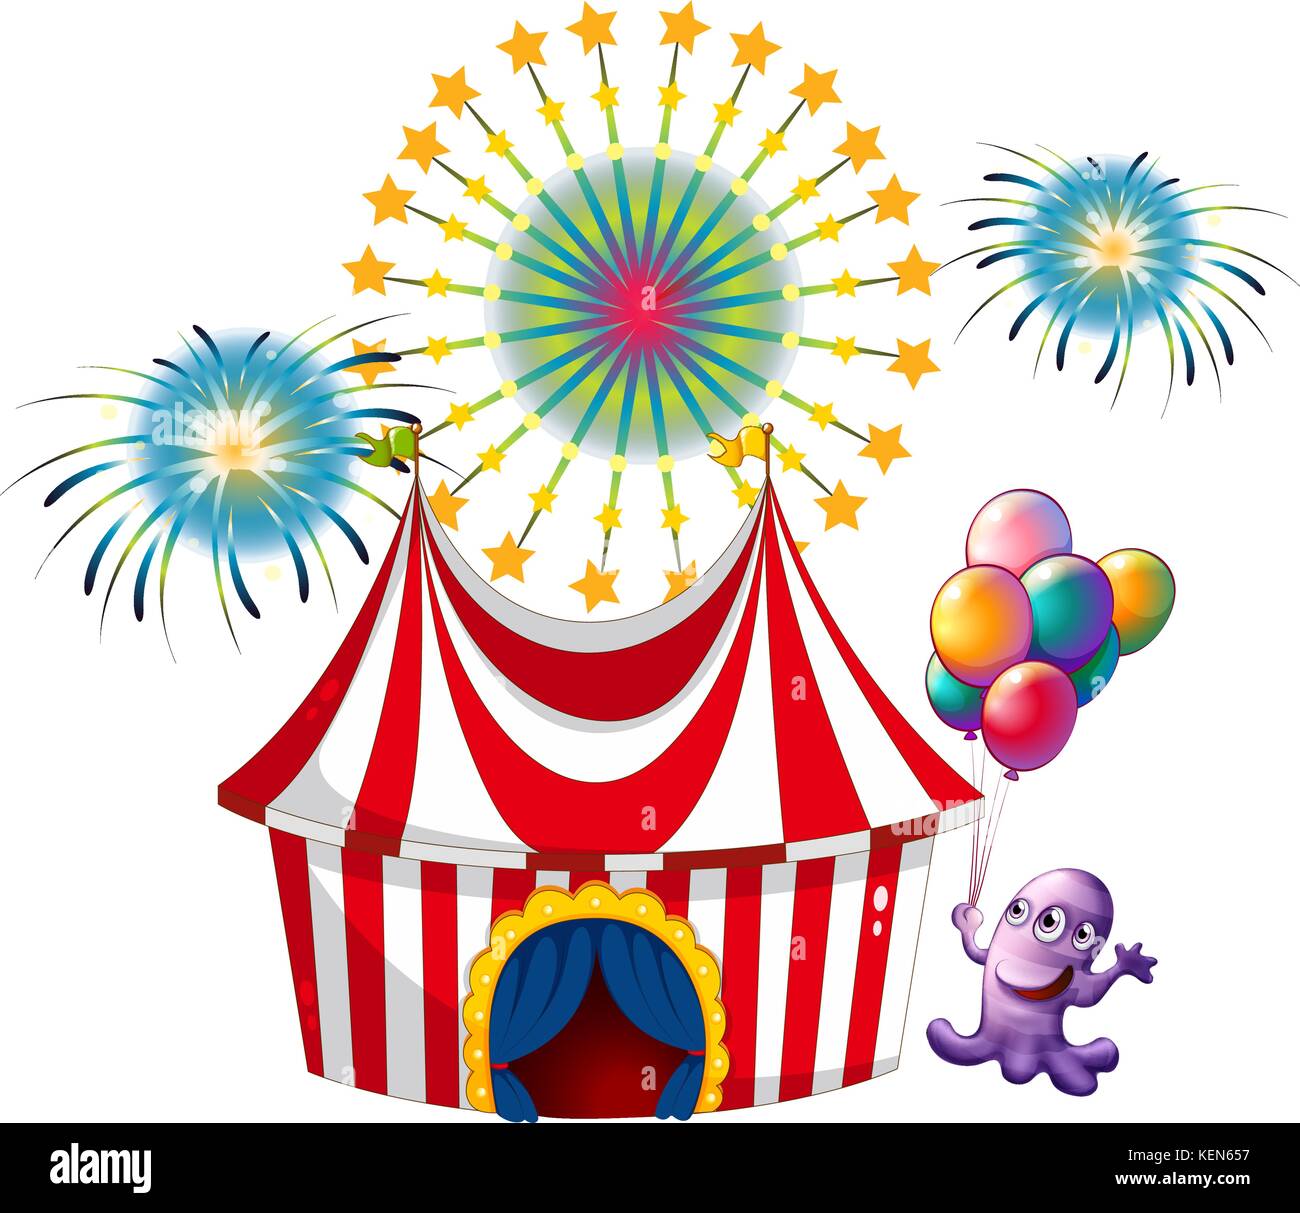 Illustration of a monster near the circus tent on a white background Stock Vector